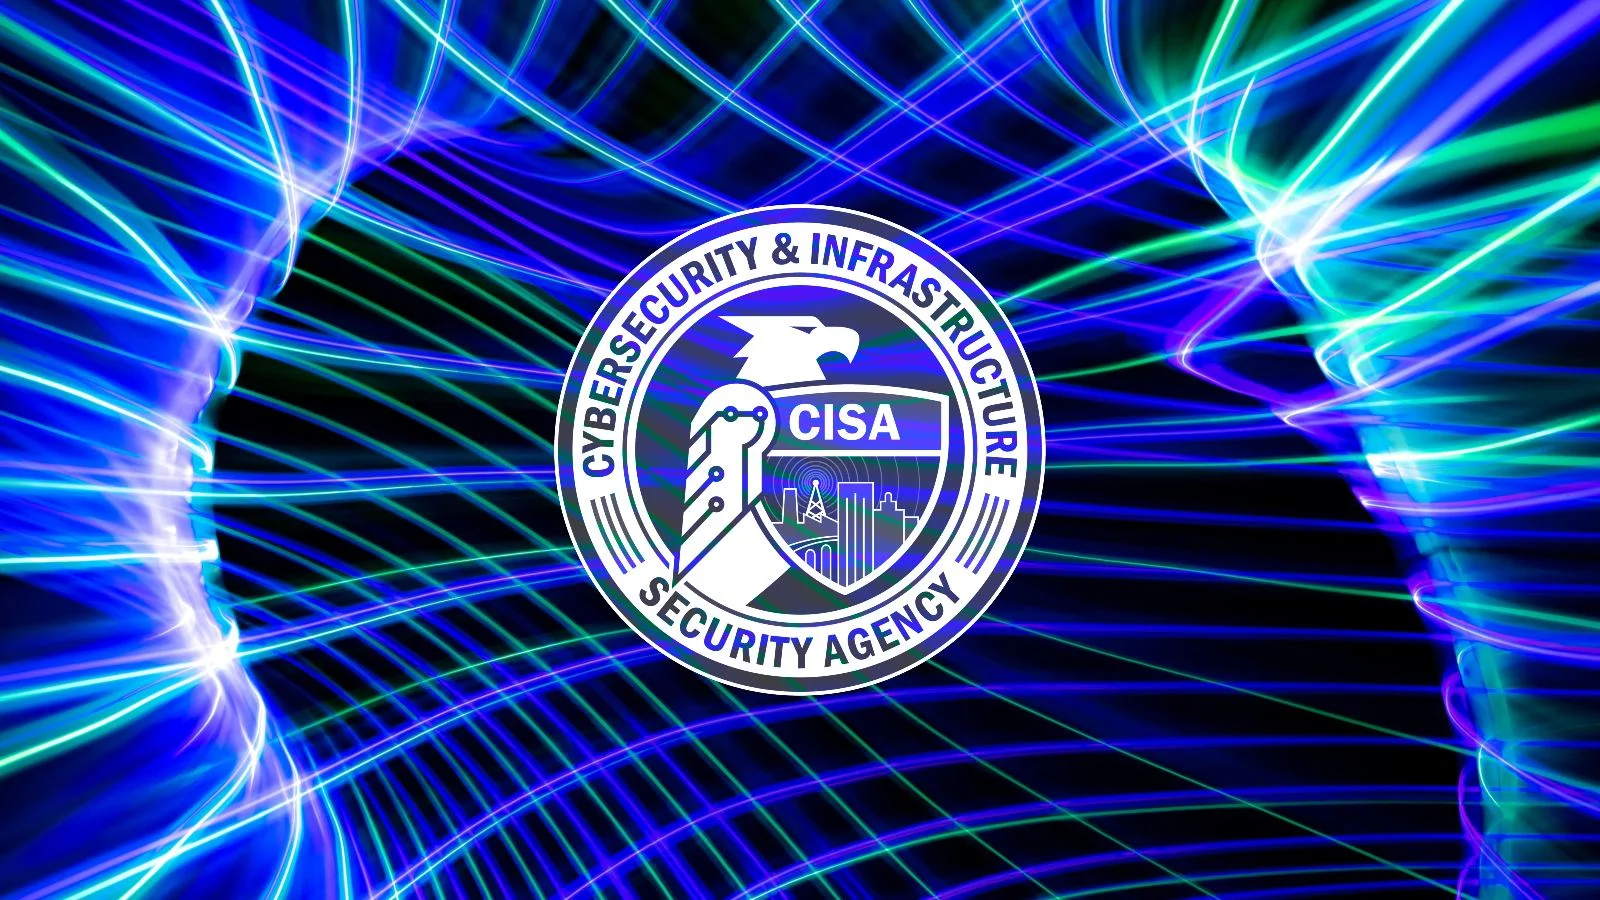 CISA - Cybersecurity & Infrastructure Security Agency Logo